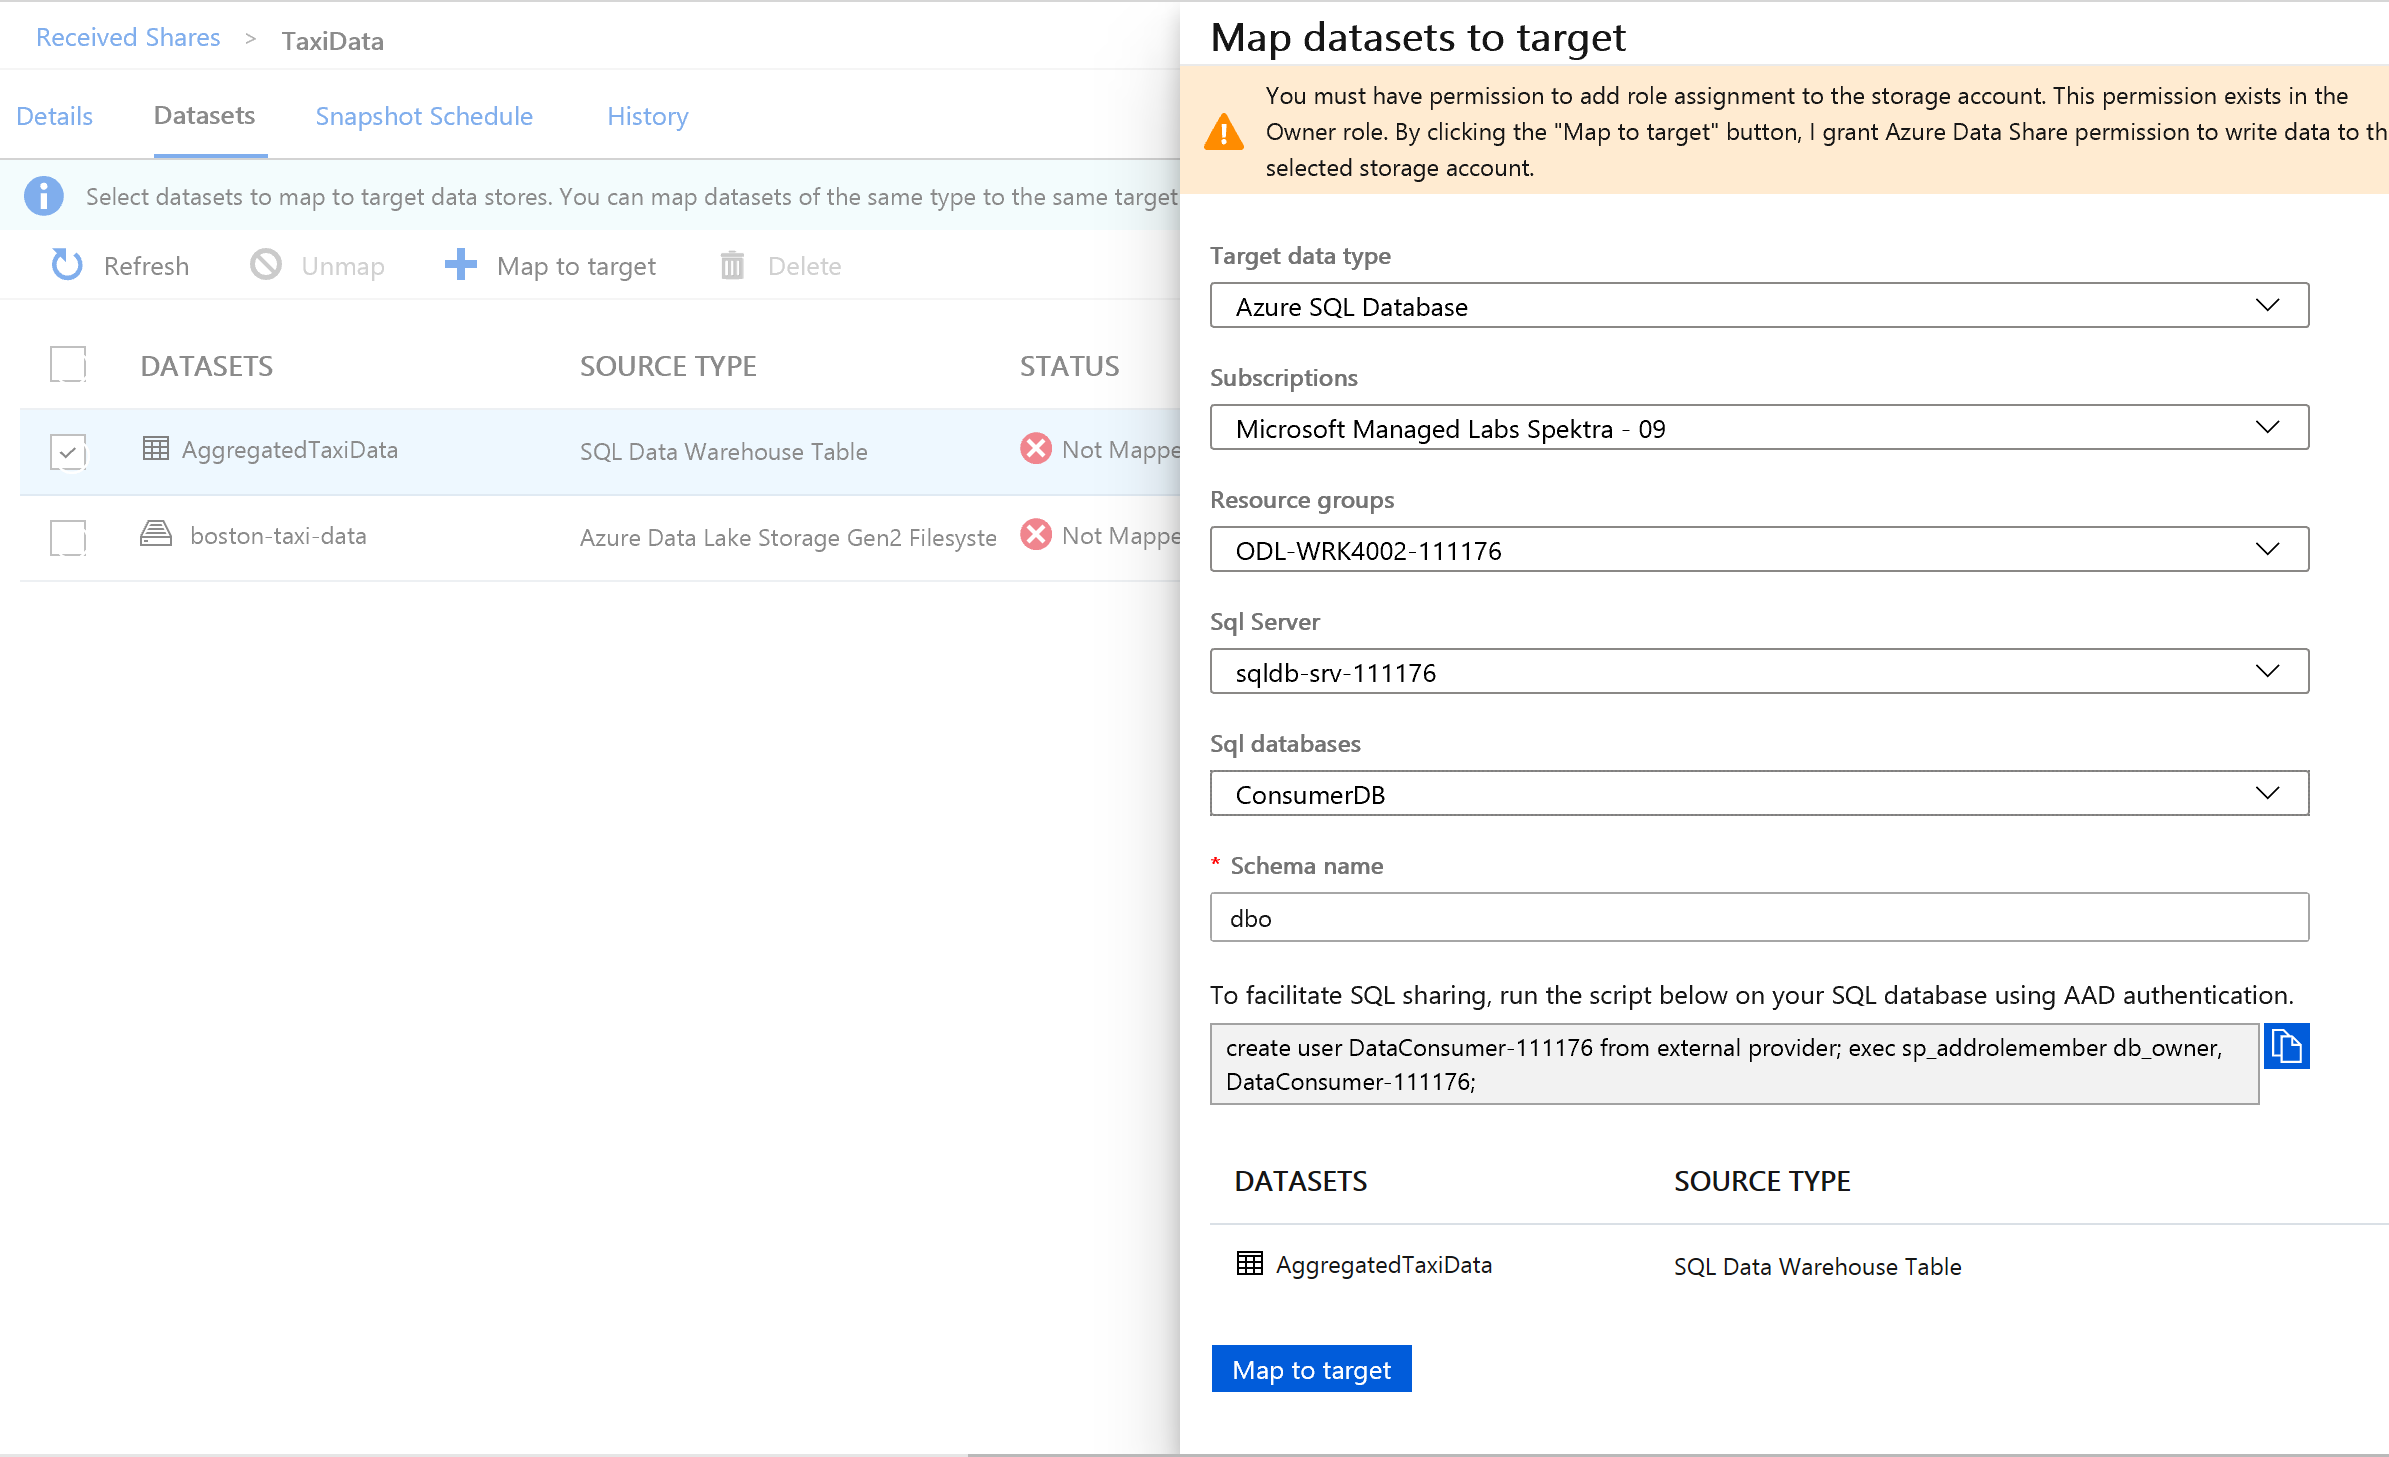 Screenshot from the Azure portal of map datasets to a target Azure SQL Database.